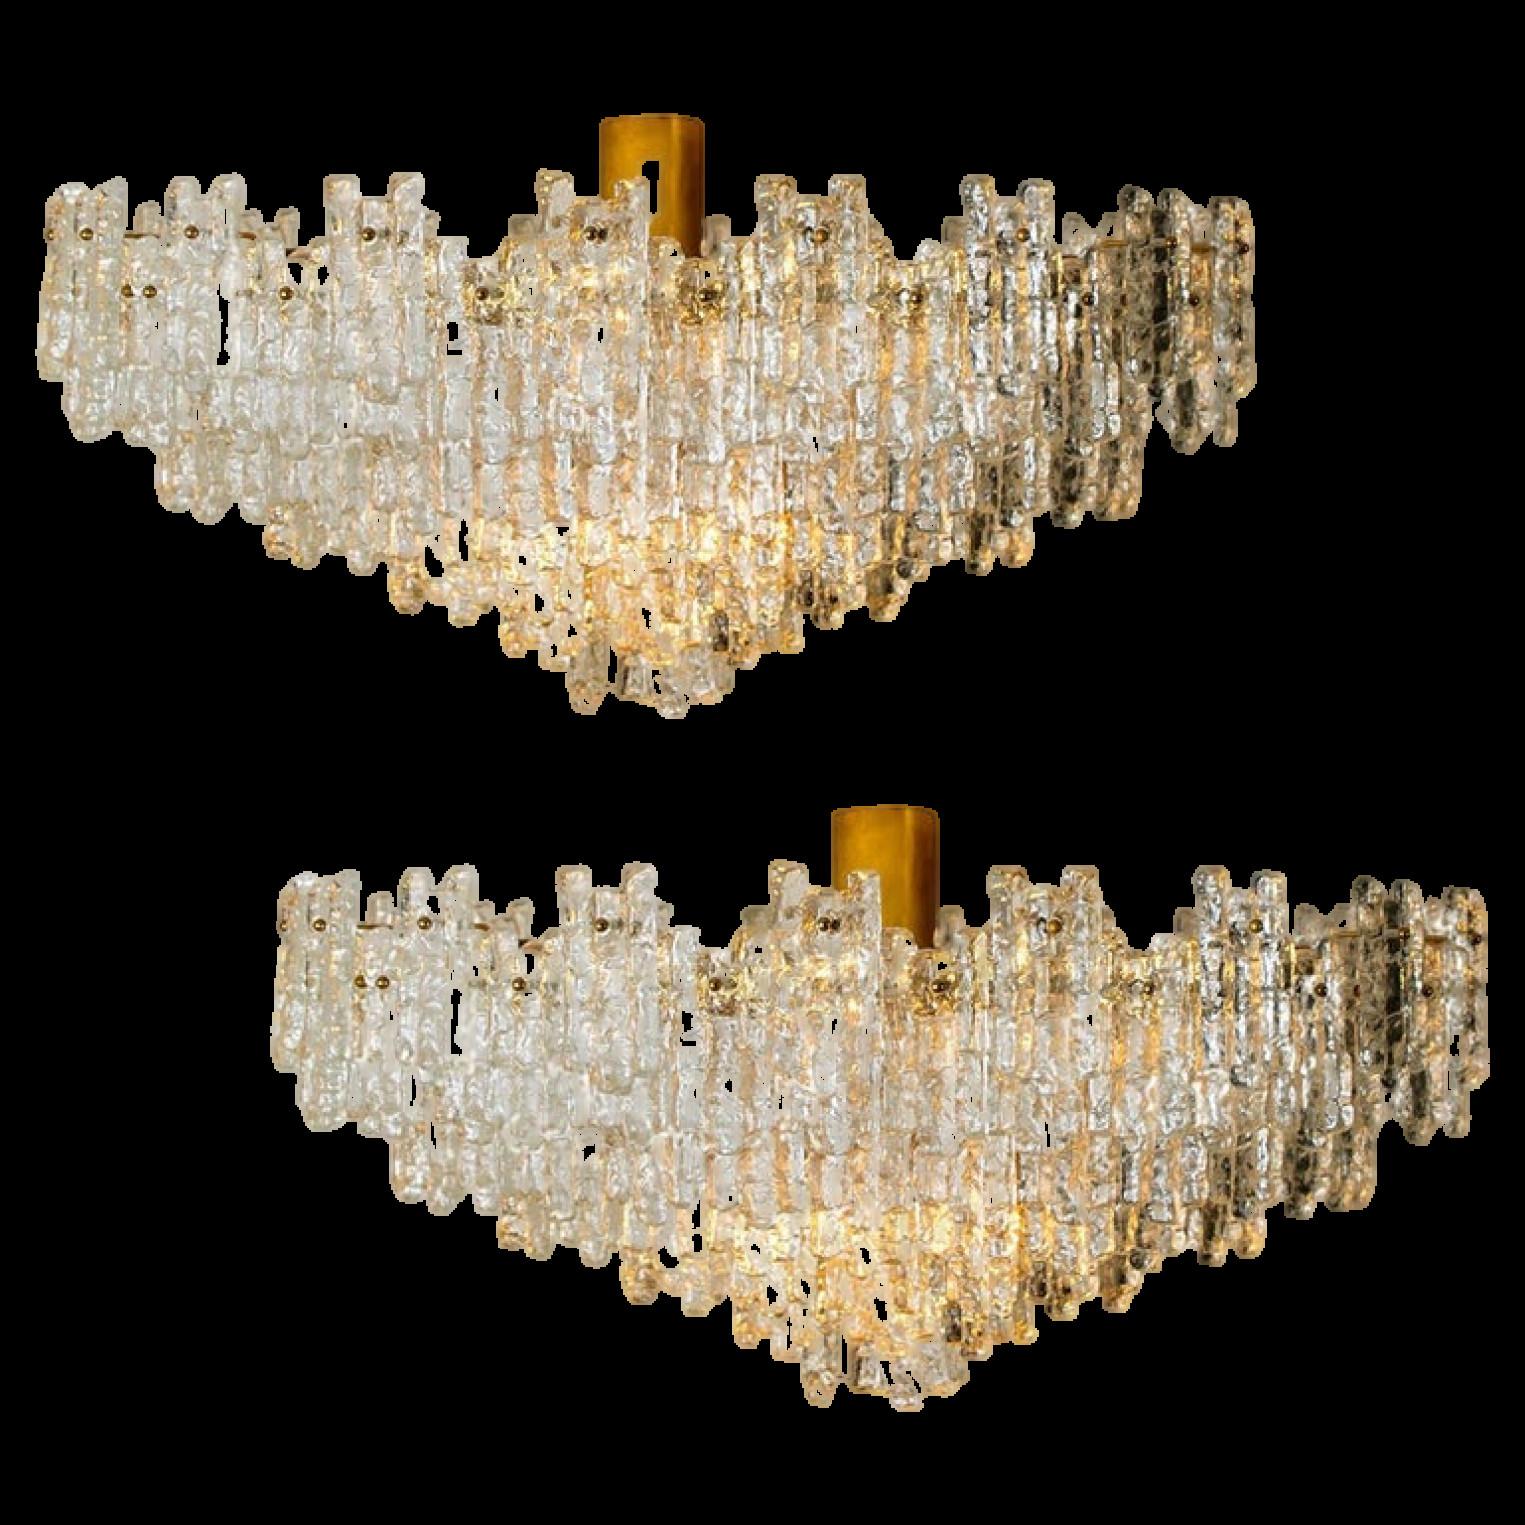 1 of the 2 exceptional, huge, clean and modern six-tier ballroom flush mount chandeliers by J.T. Kalmar Leuchten from the 1960s. The chandelier consists six layers with a 141 hand blown textured glass shades mounted on a brass frame arranged in